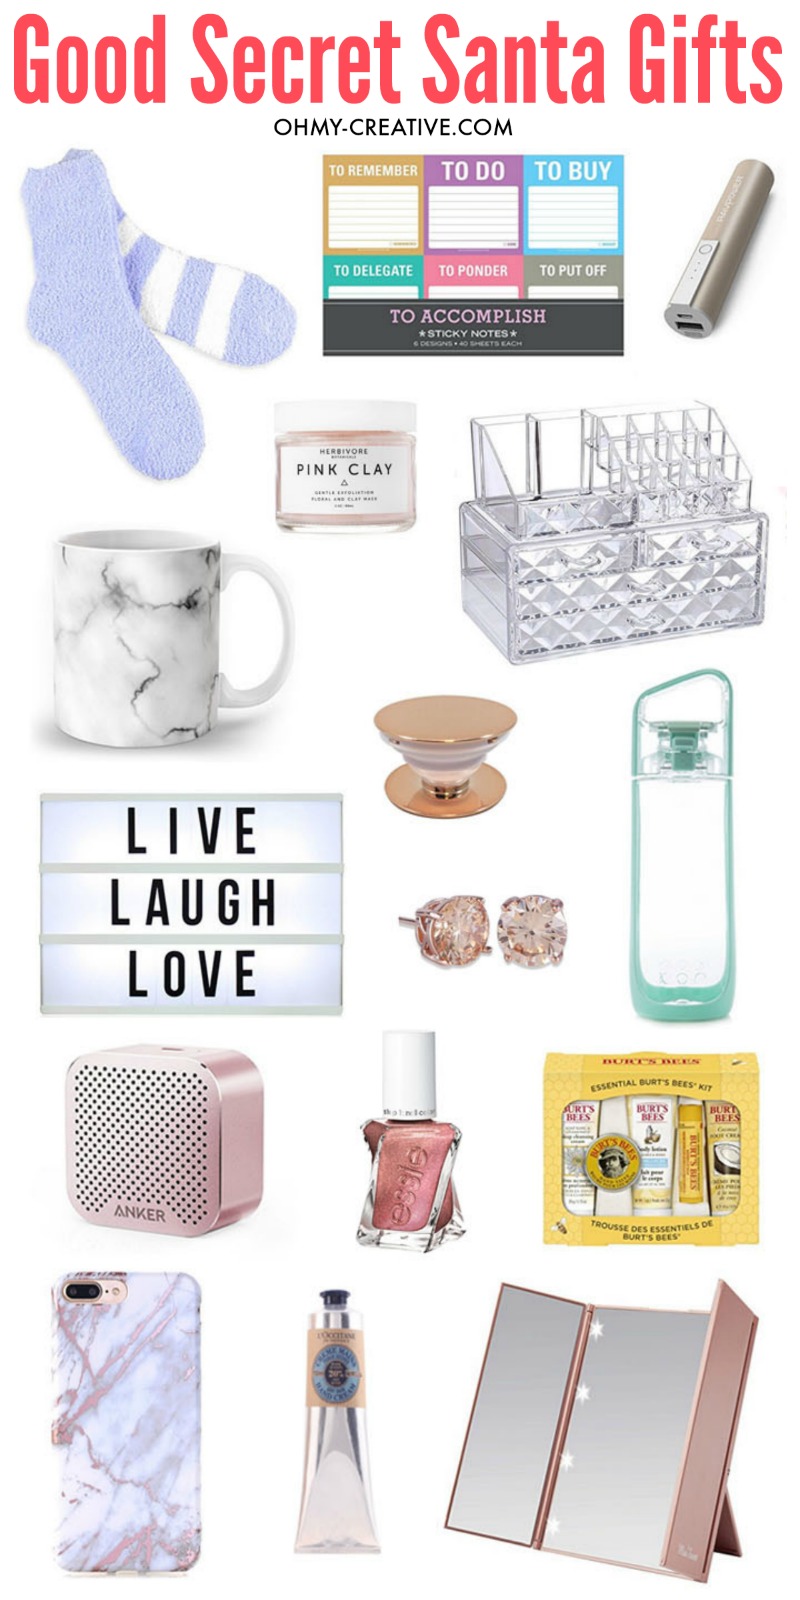 Looking for some really good secret Santa gifts? This practical list of gifts has something for everyone: socks, beauty items, water bottles, mugs, and electronic accessories.